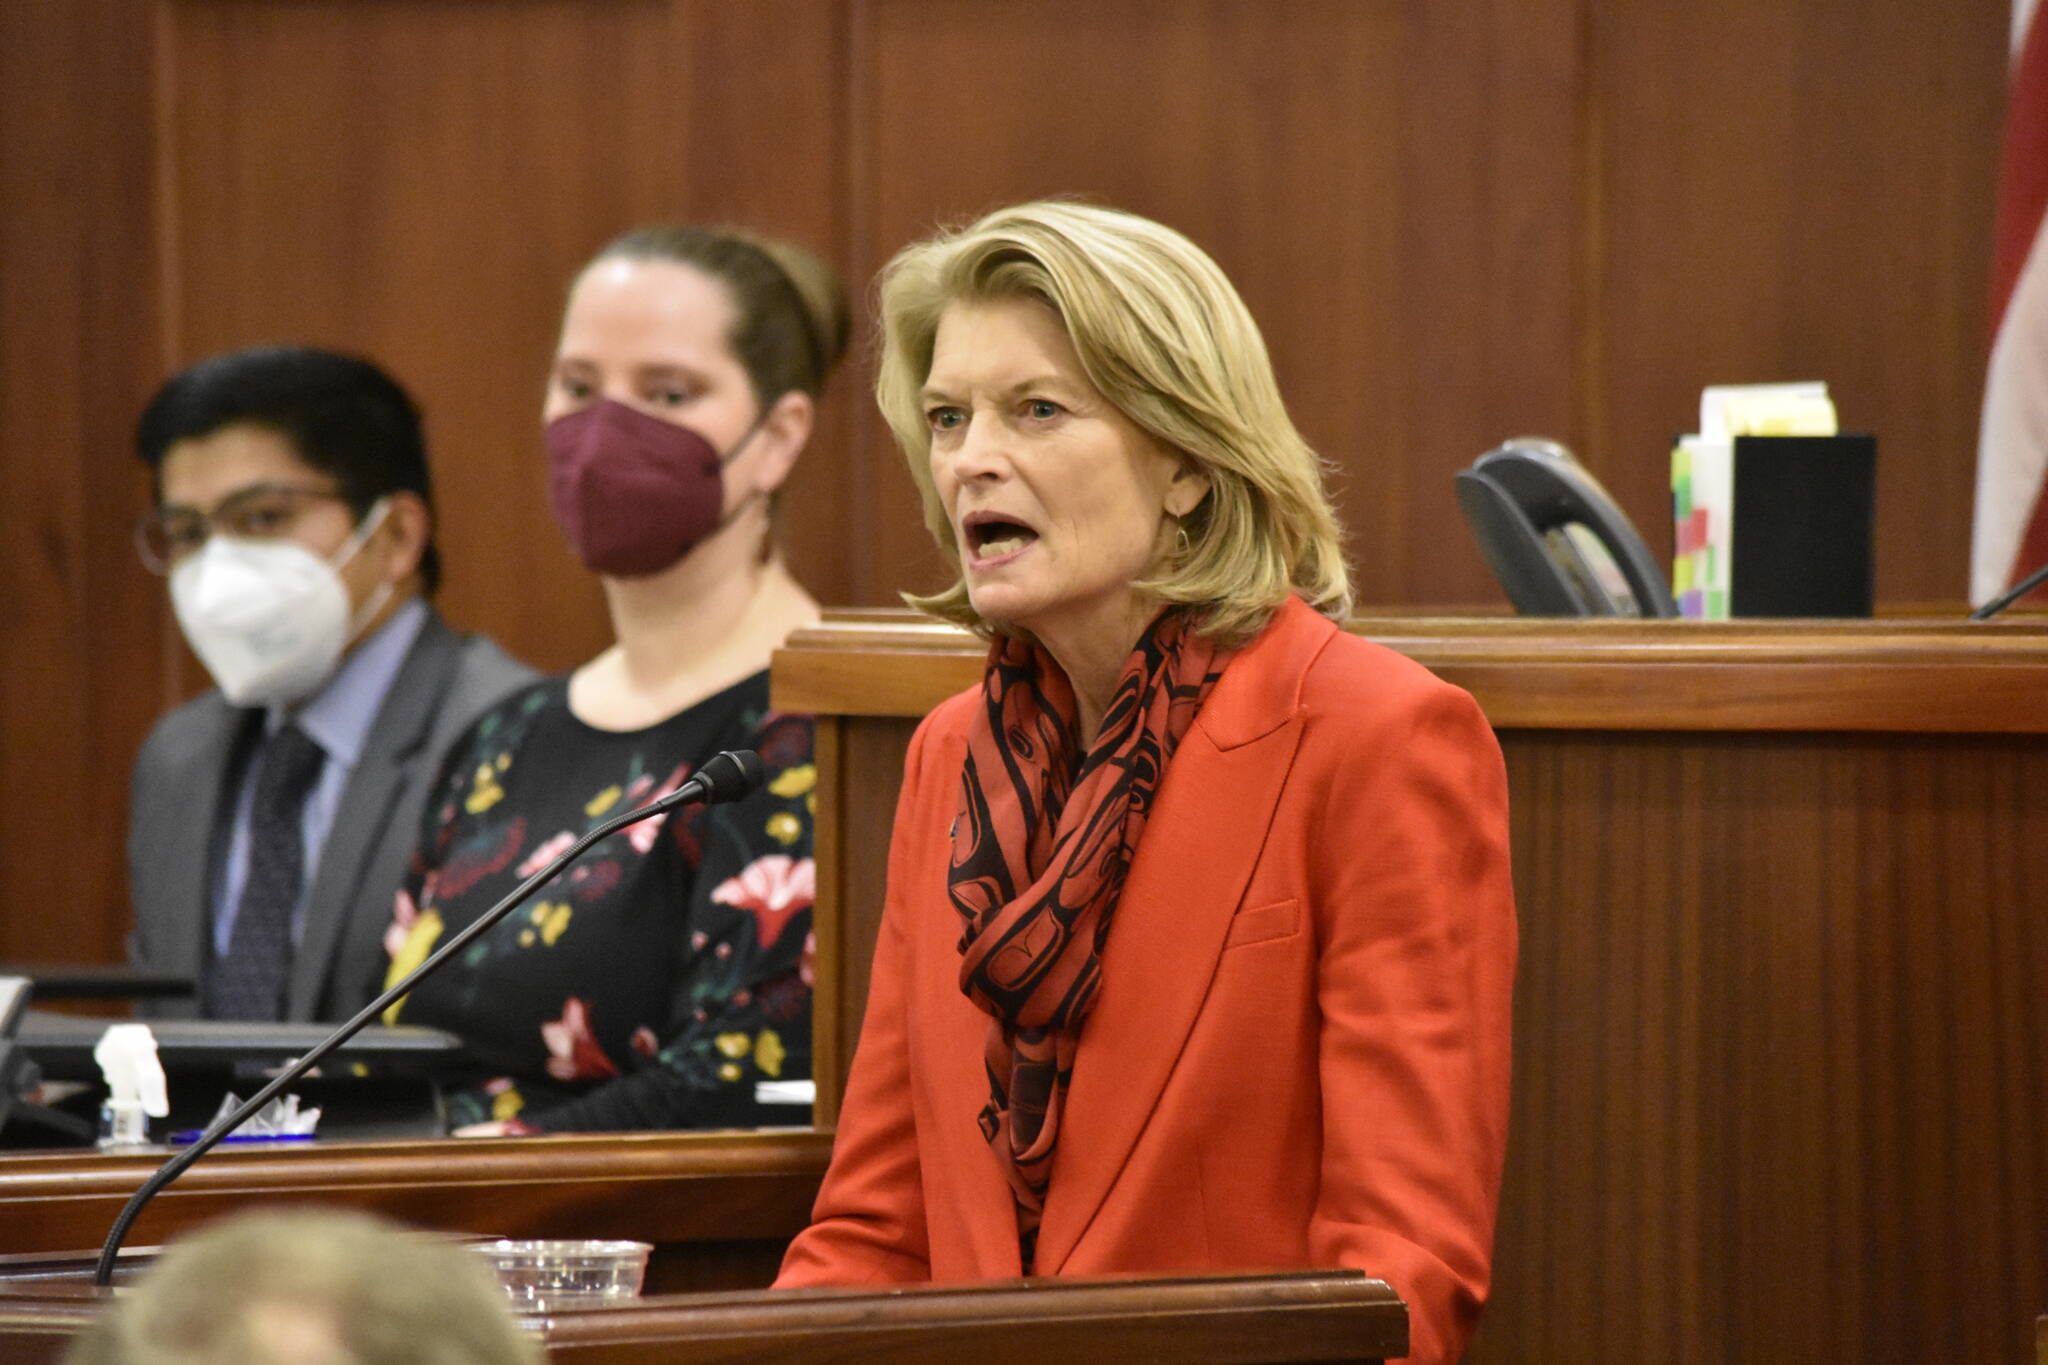 U.S. Sen. Lisa Murkowski, R-Alaska, who spoke to the Alaska State Legislature on Feb. 22, 2022, said in a news conference Thursday she was supporting the Bipartisan Safer Communities Act aimed at addressing the high levels of gun violence in the U.S. (Peter Segall / Juneau Empire file)